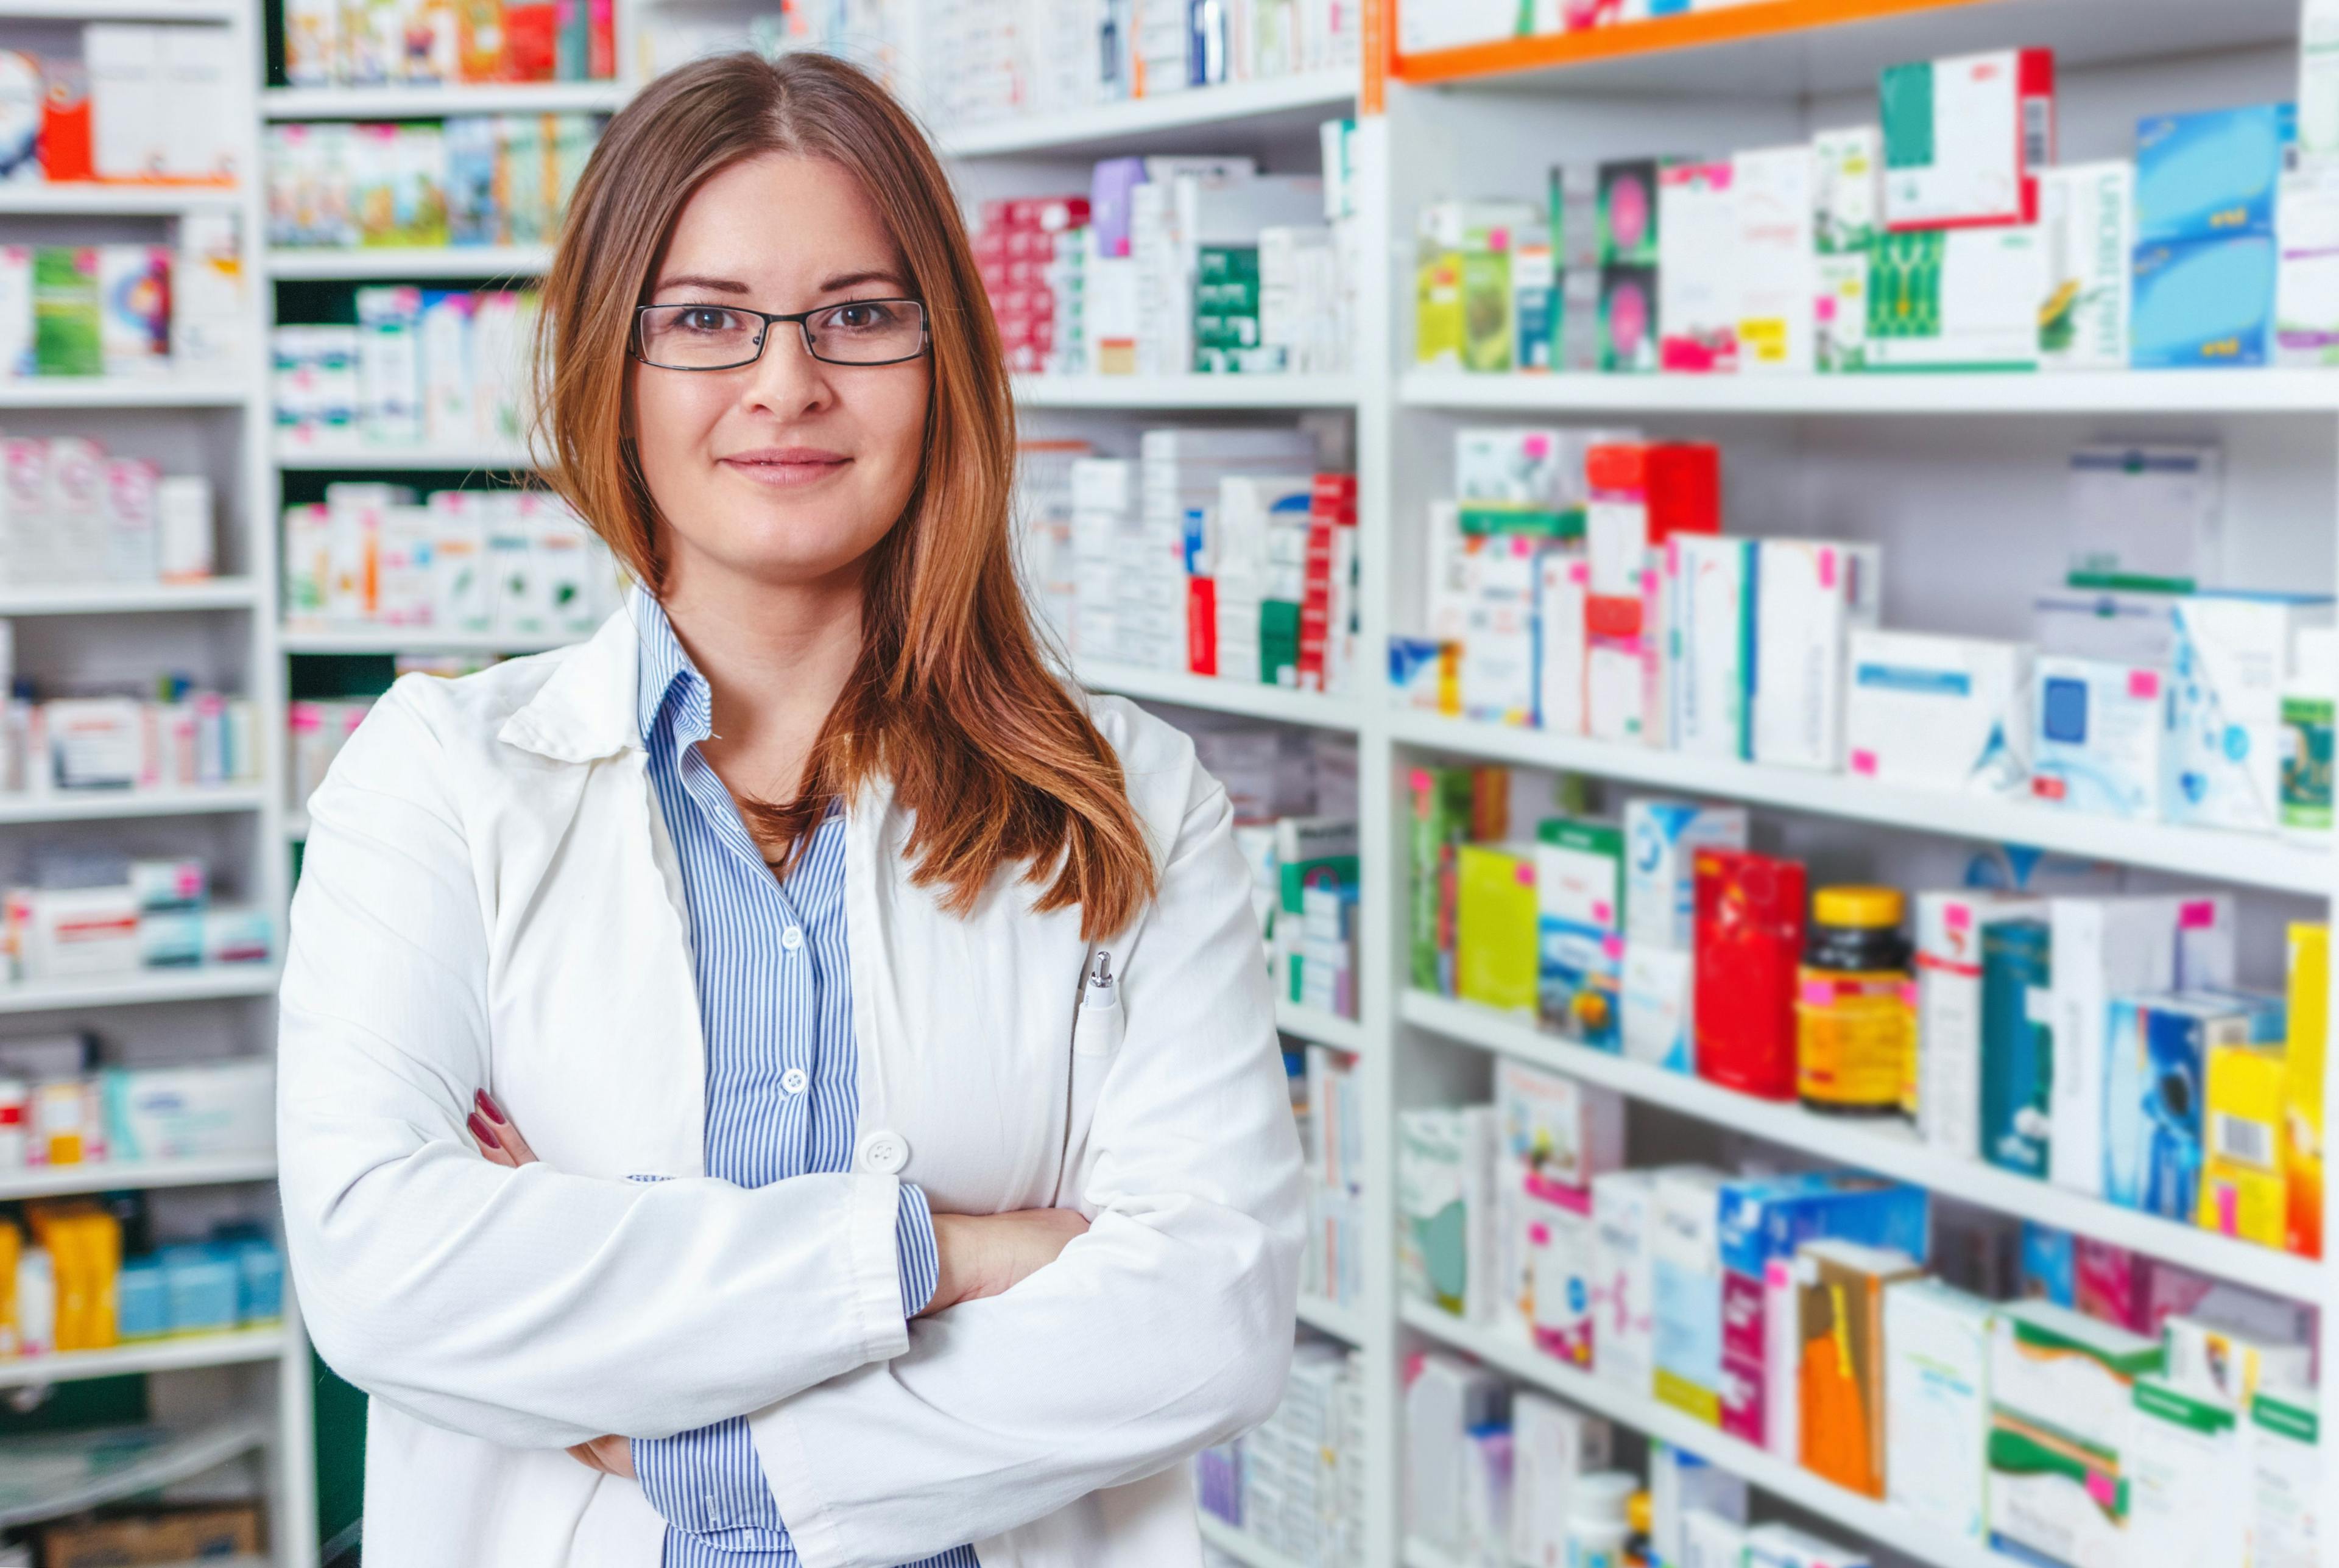 Expert: Pharmacies Play Key Role in Health Equity, But Reimbursement is Necessary